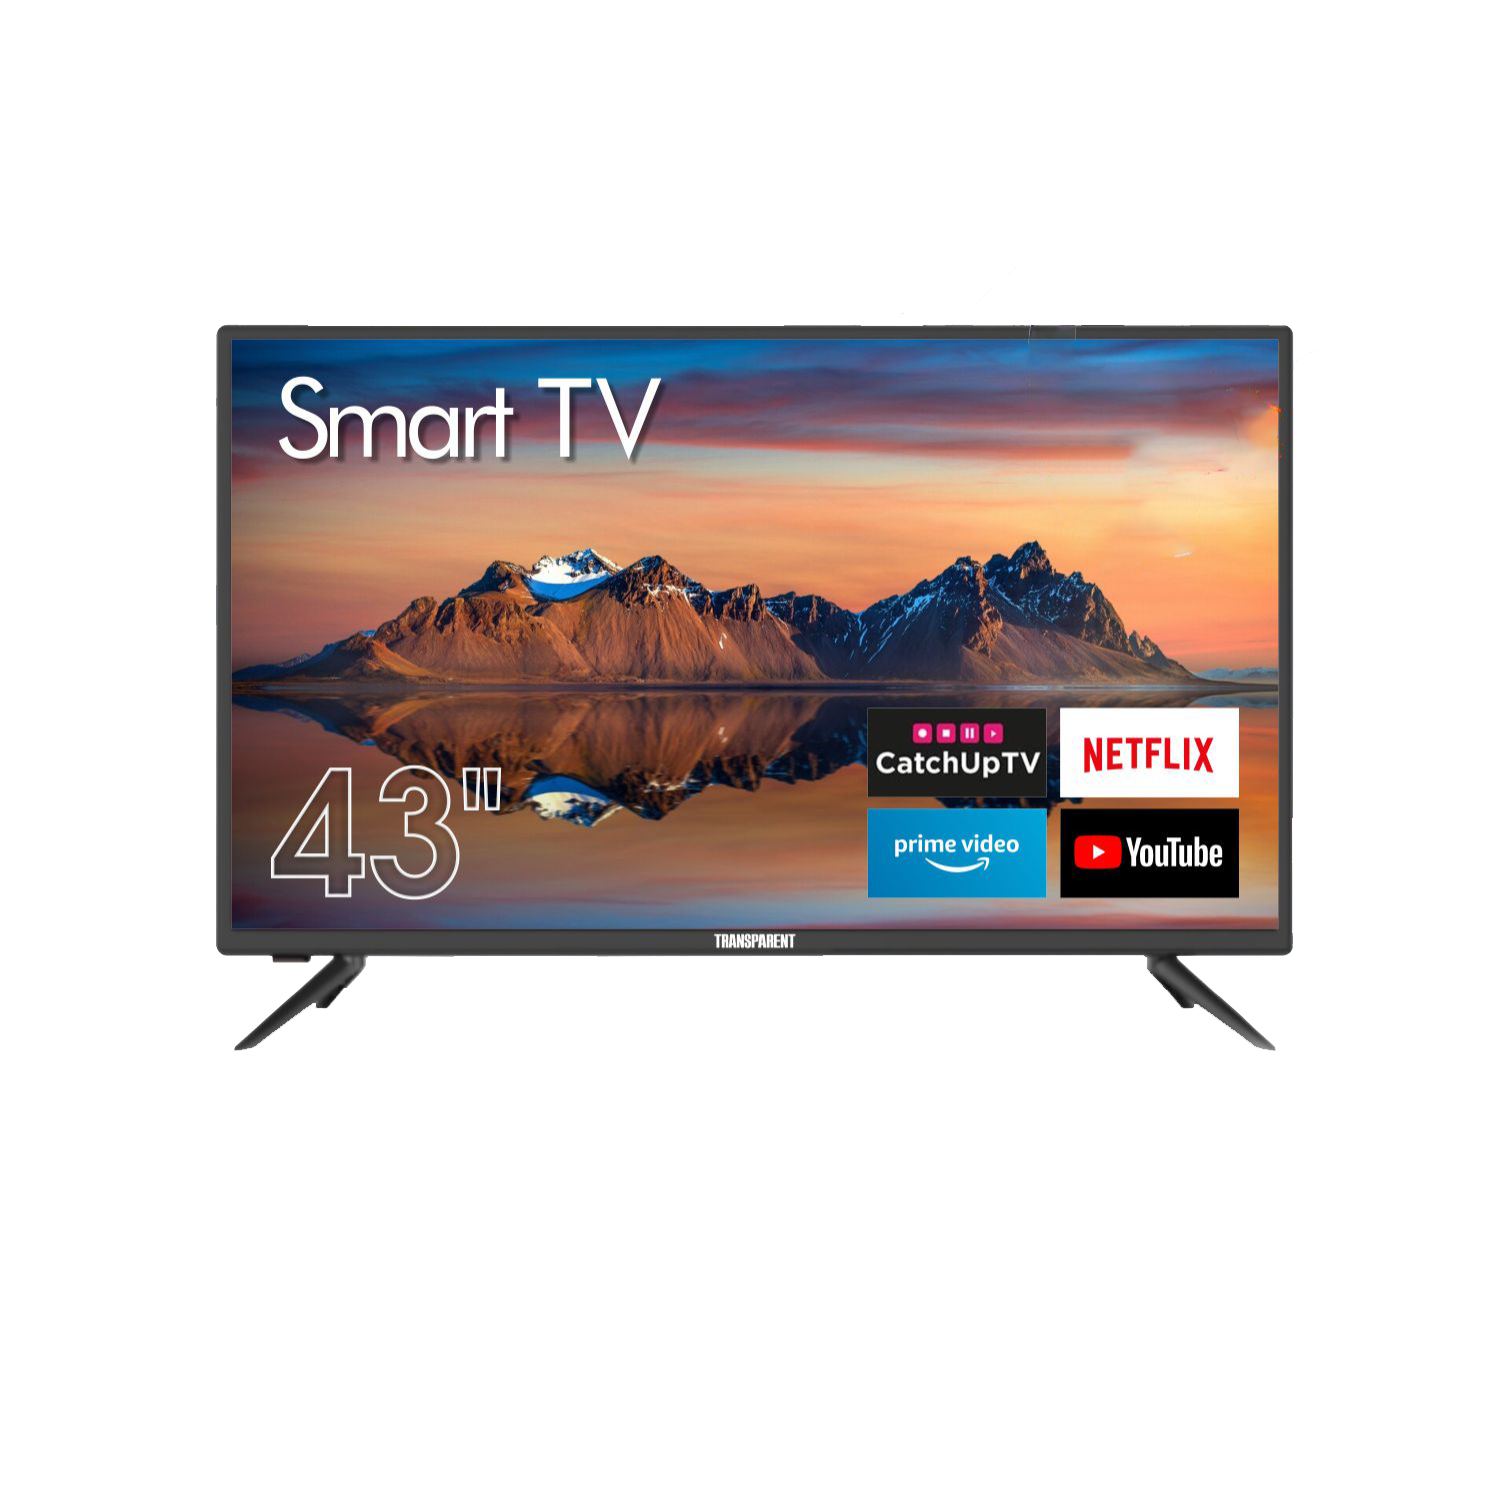 TRANSPARENT 43 Inches Television (E43B71B) Smart TV | HBNG80a